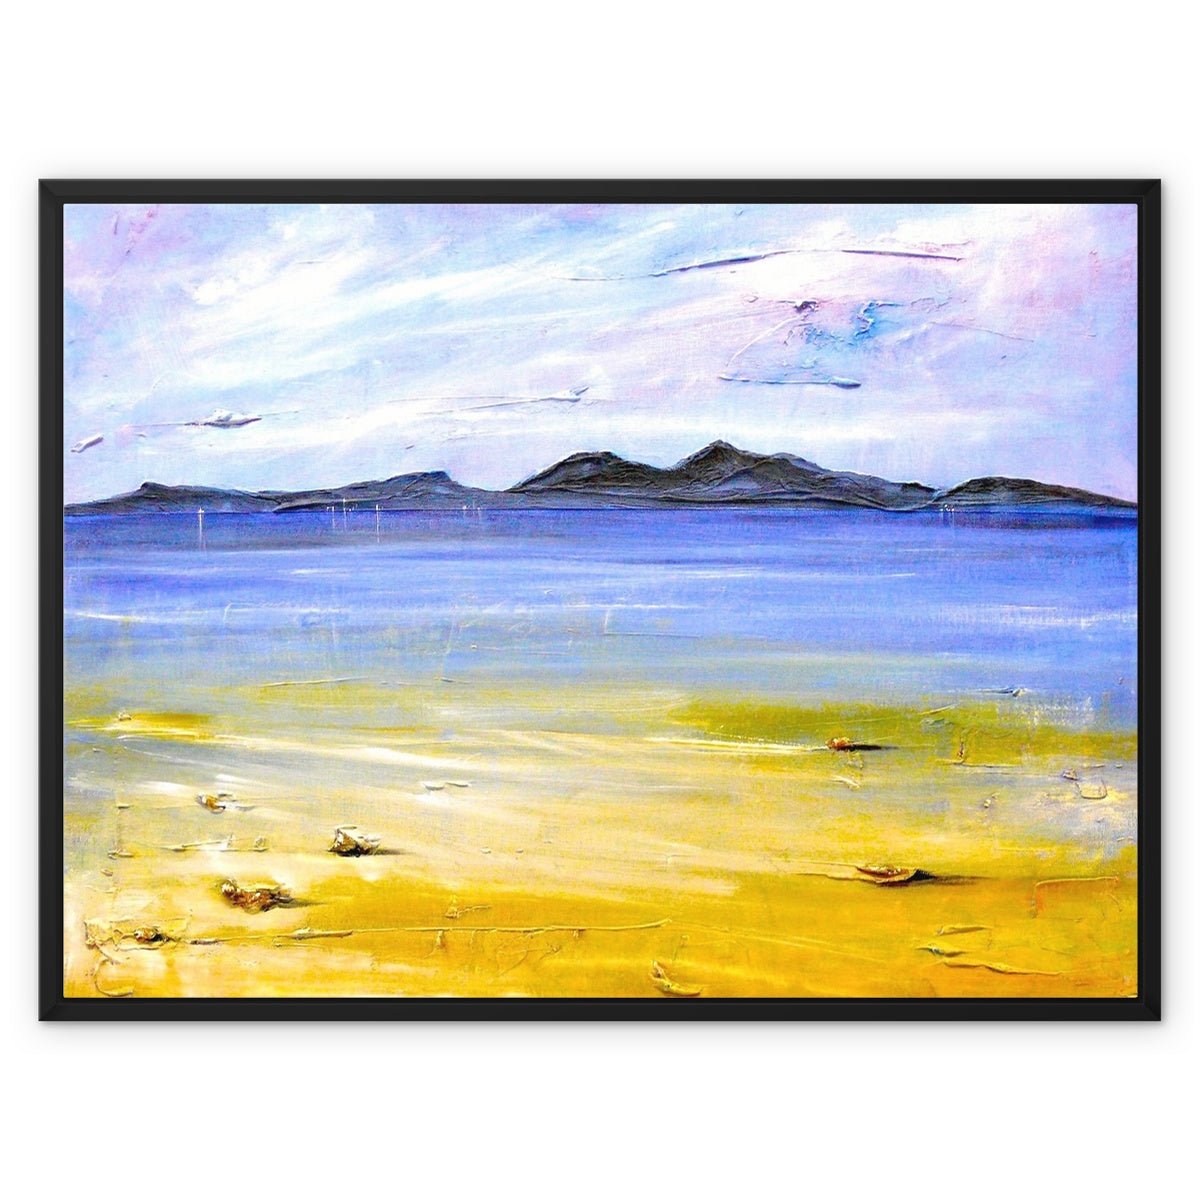 Camusdarach Beach Arisaig Painting | Framed Canvas-Floating Framed Canvas Prints-Scottish Highlands & Lowlands Art Gallery-32"x24"-Black Frame-Paintings, Prints, Homeware, Art Gifts From Scotland By Scottish Artist Kevin Hunter